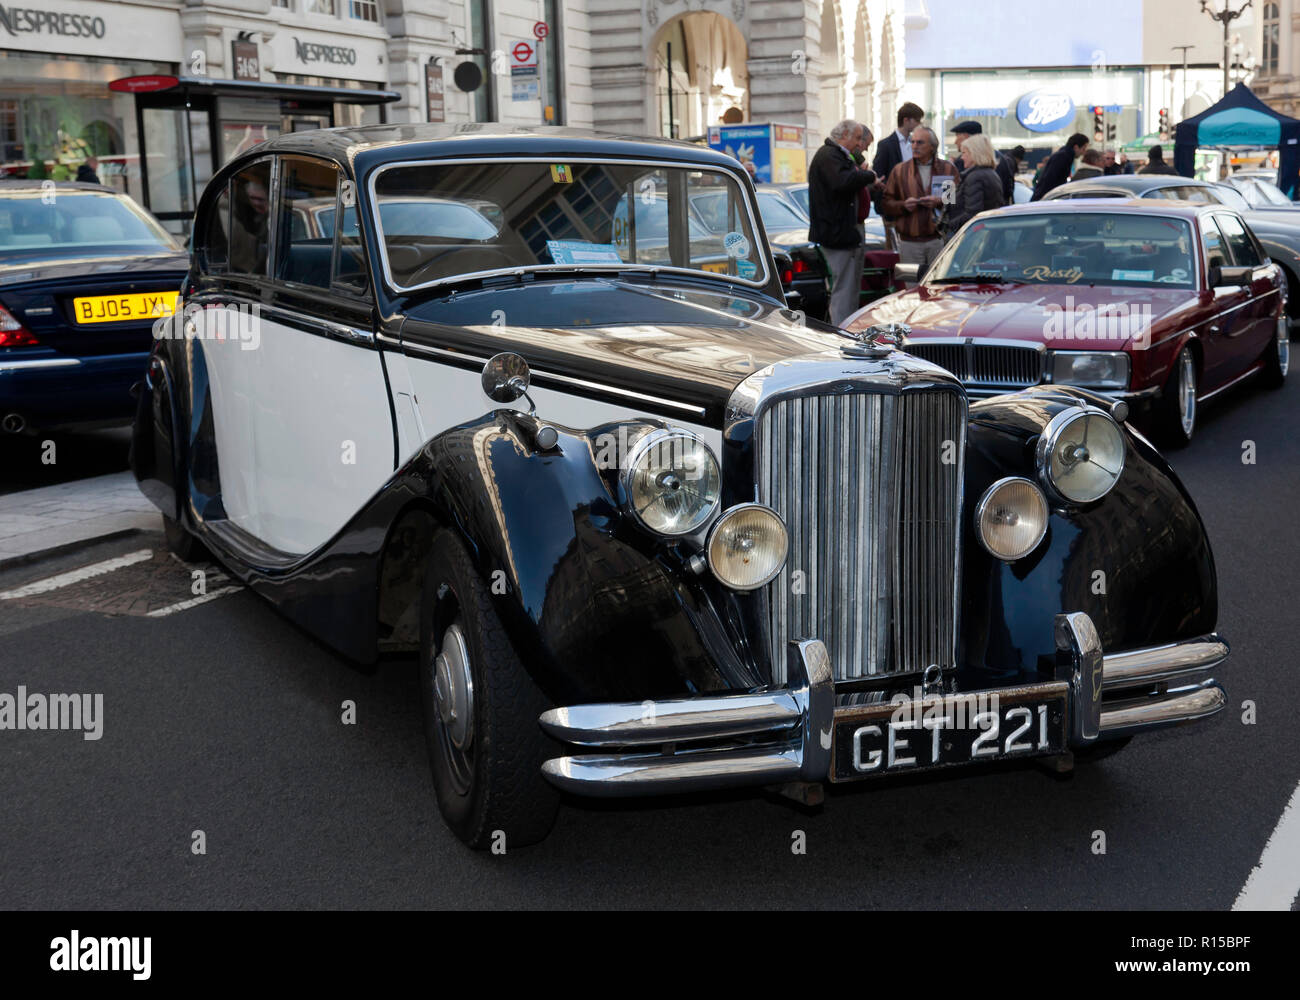 Three-quarter front view of a 1950 Jaguar Mark V Saloon, on display at the Regents Street Motor Show 2018 Stock Photo